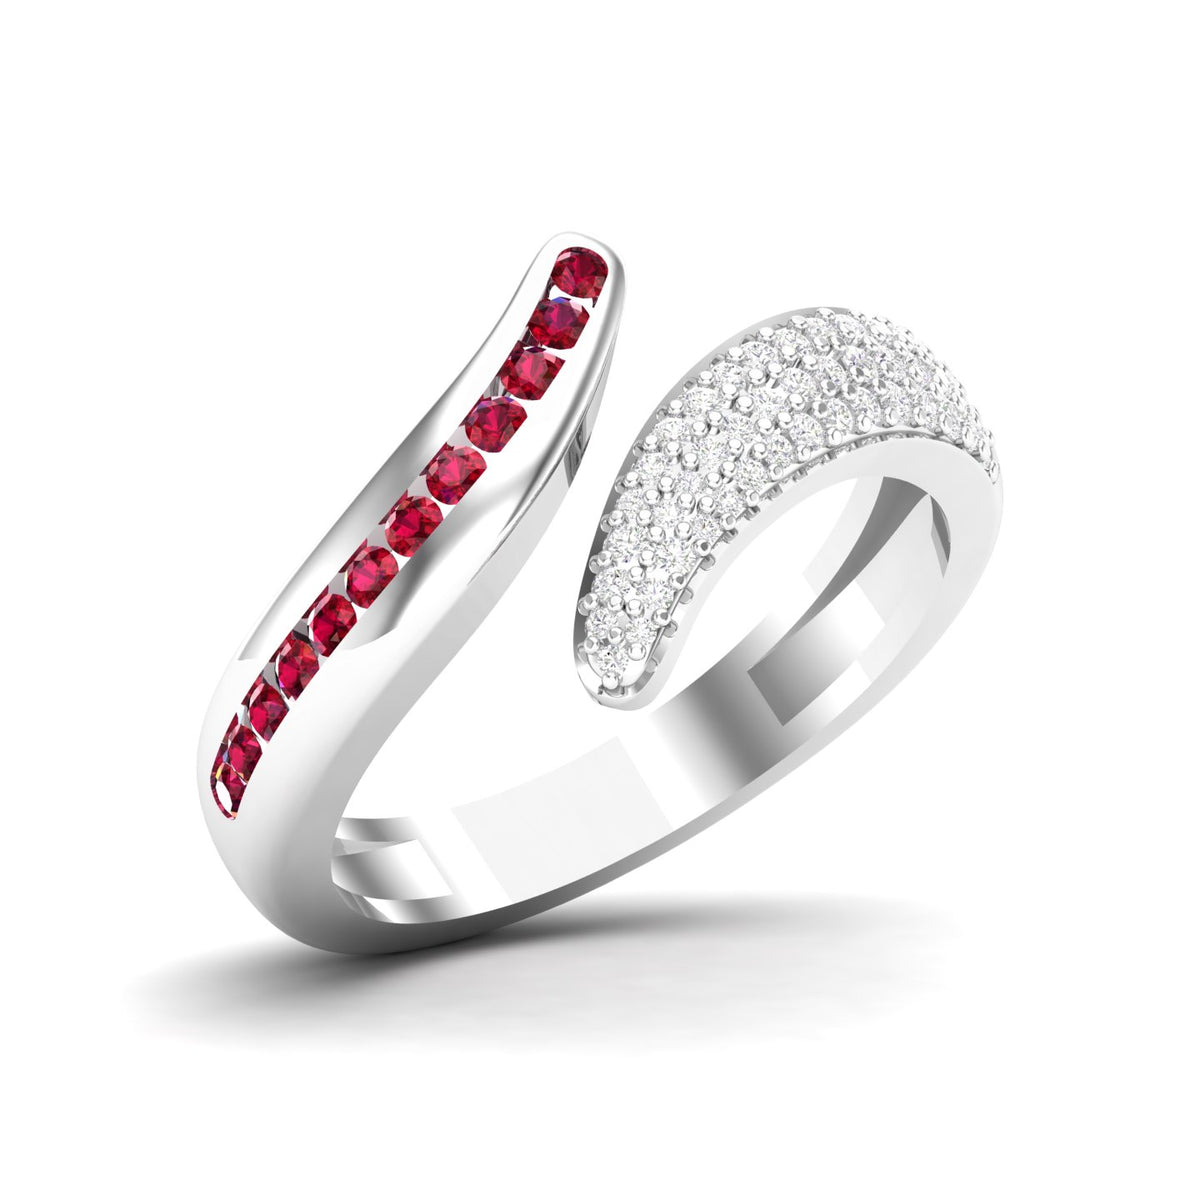 Maurya Ornate Channel-Set Ruby Bypass Ring with Pave-Set Diamonds